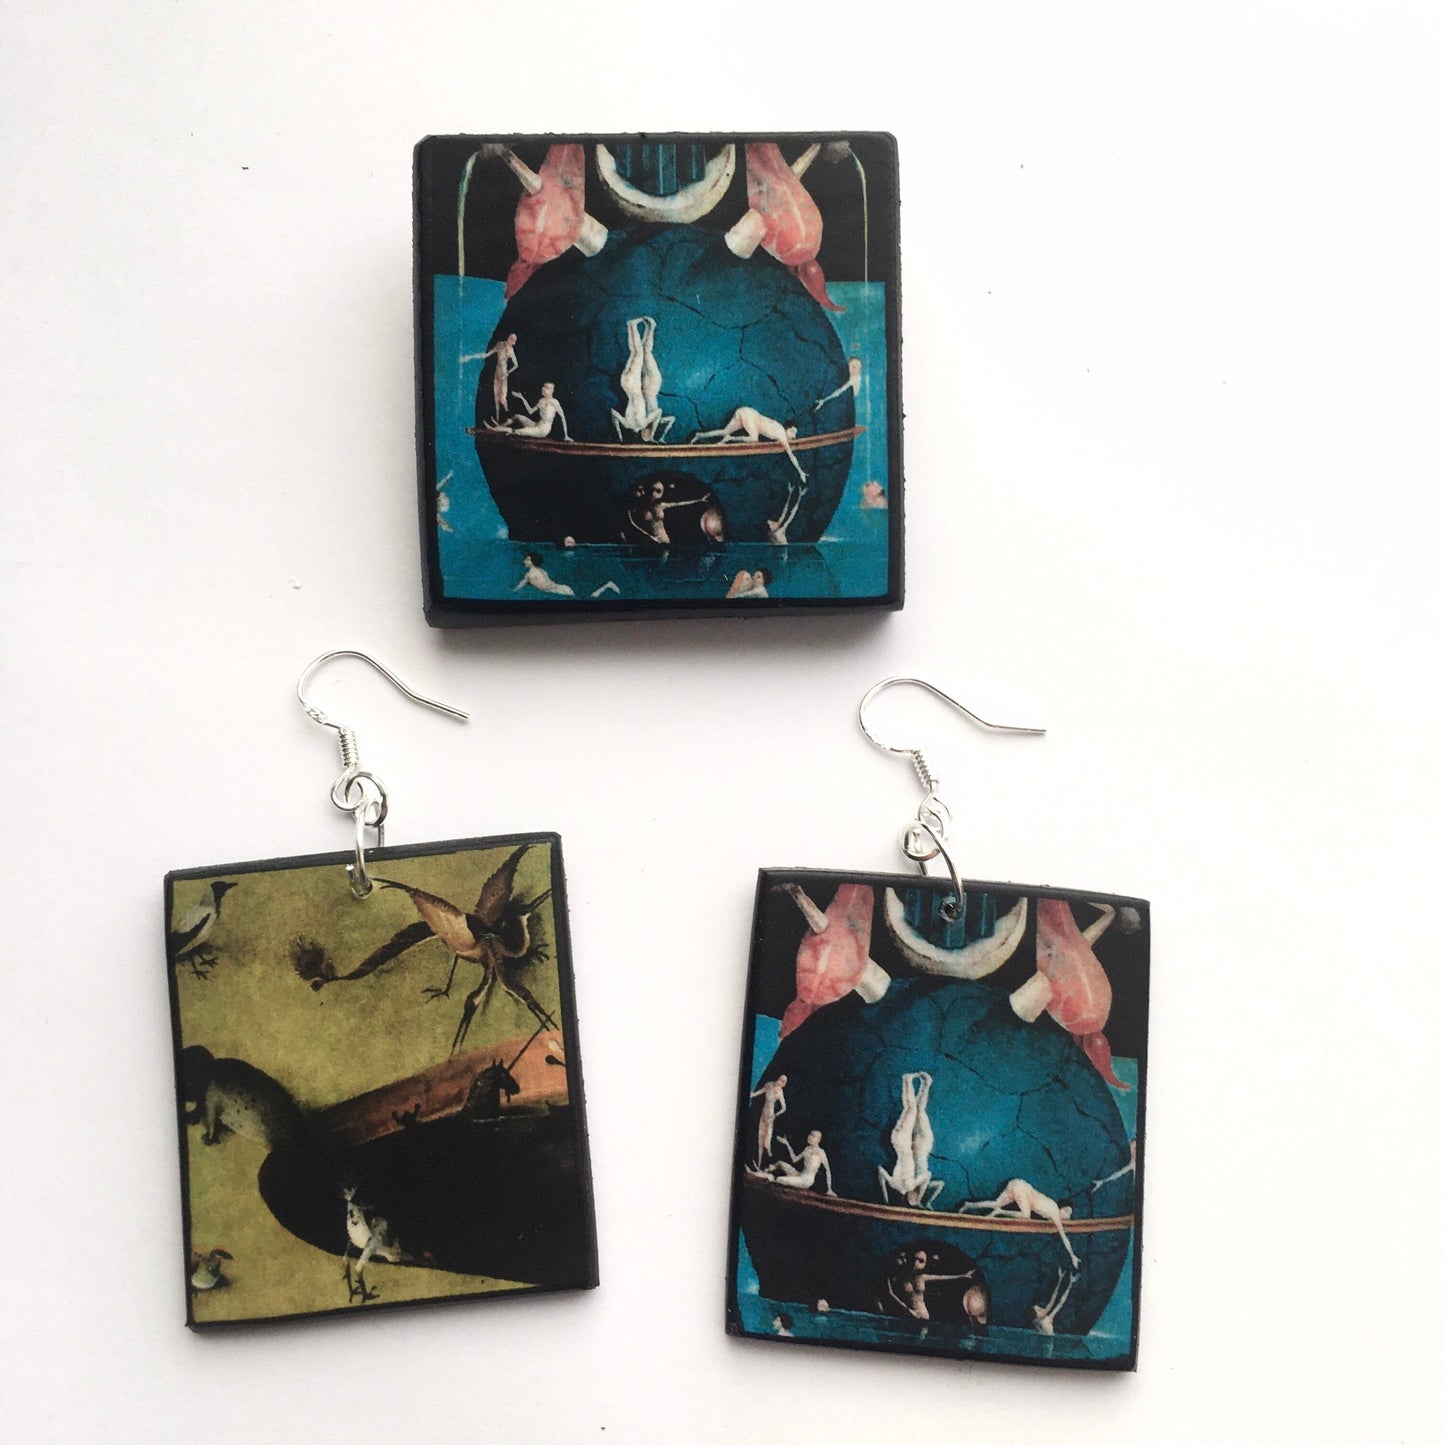 Set of mismatched earrings and one brooch based on Hieronymus Bosch art.